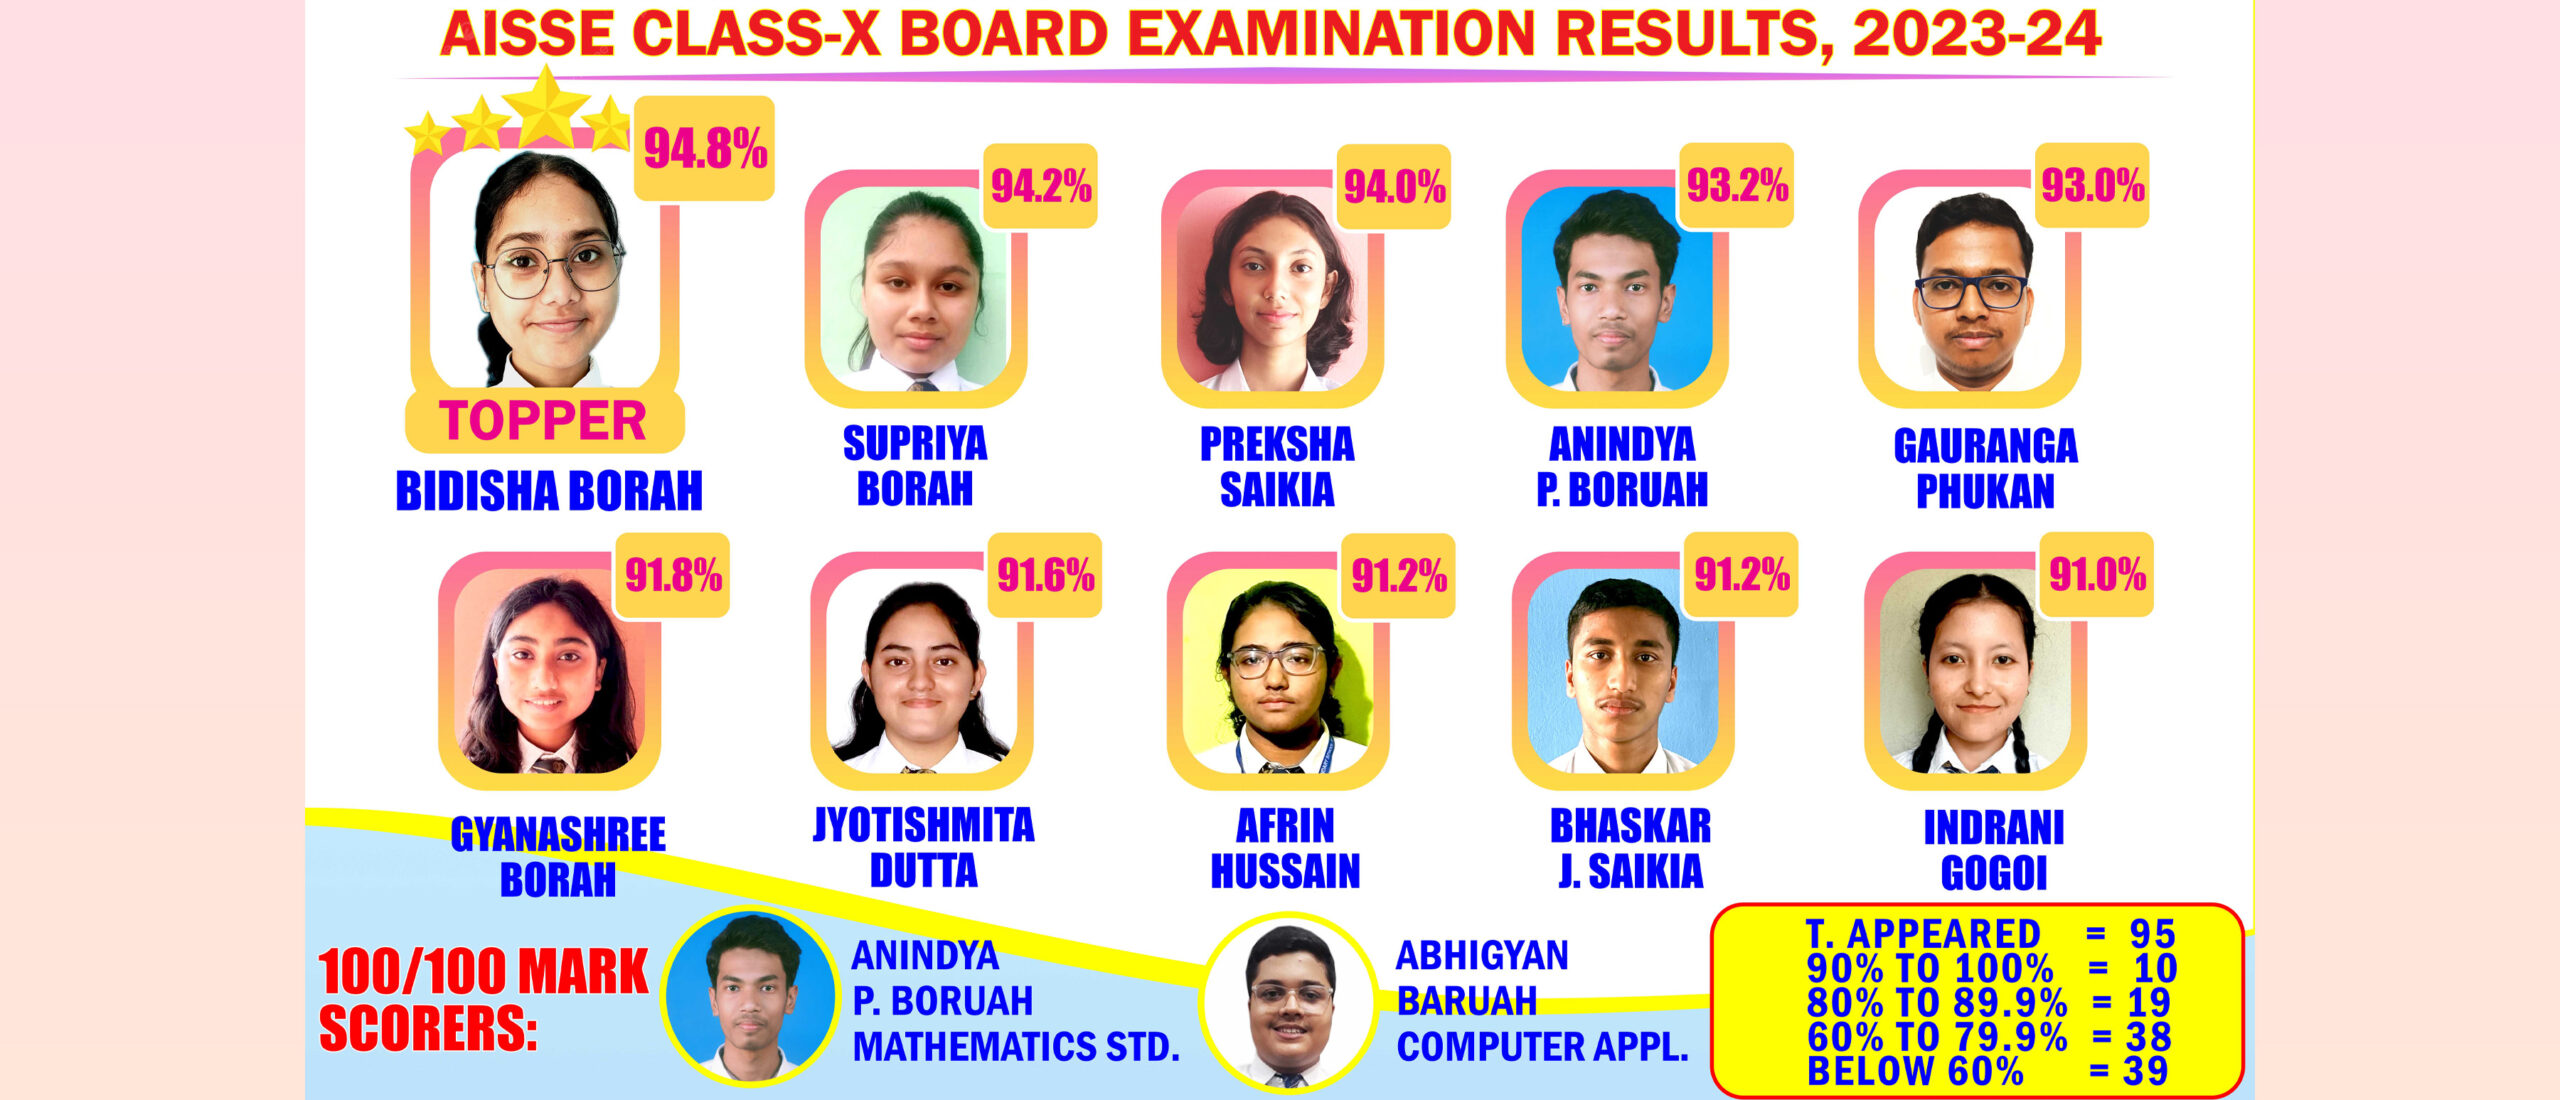 CBSE AISSE BOARD RESULTS 2023-24